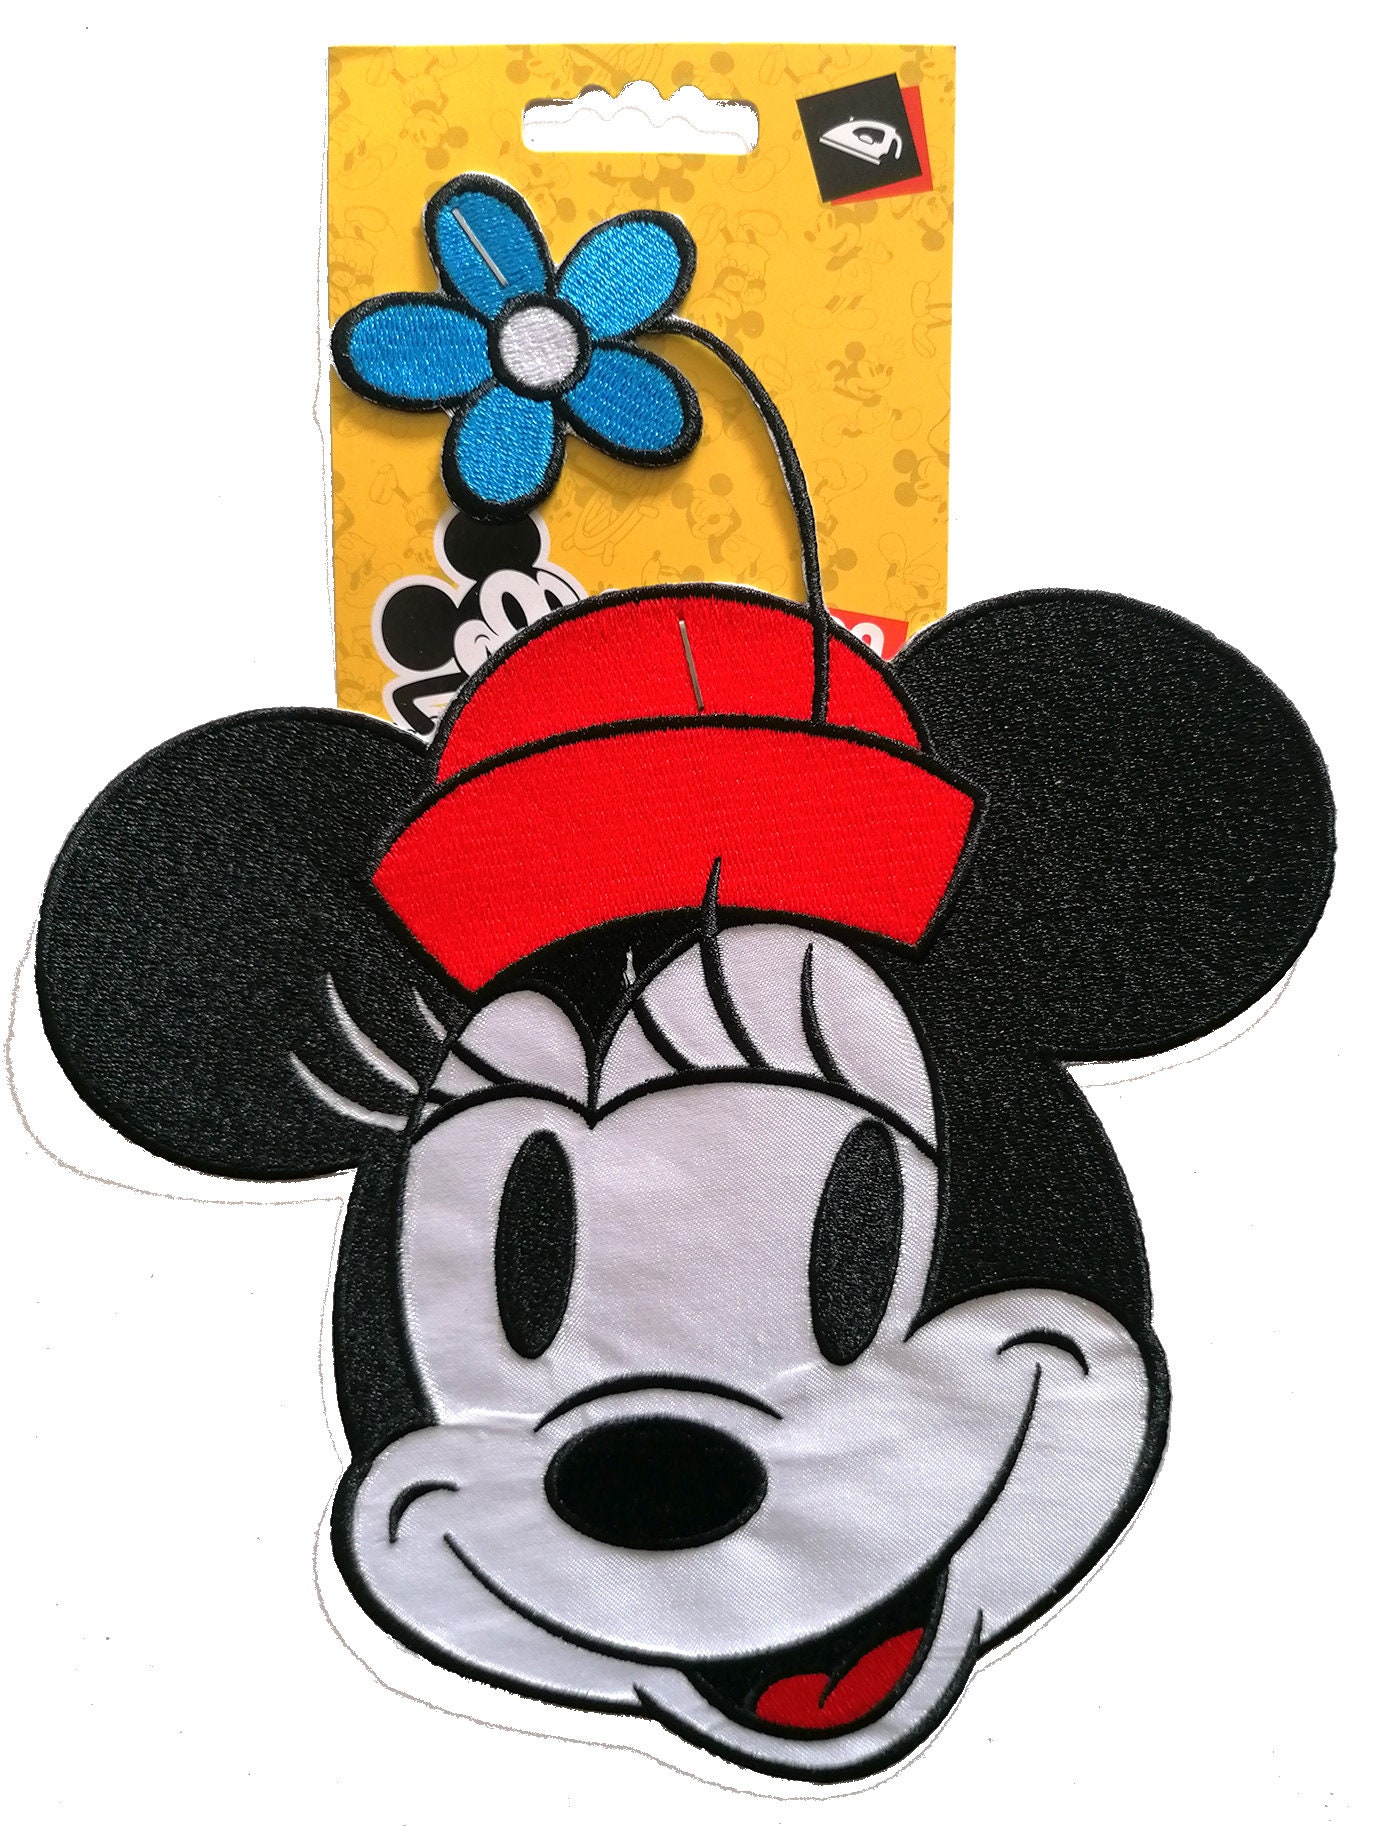 Iron on patches - Mickey Mouse 90 Years 01 Mickey & Minnie nineties special  Edition Disney - red - 6,4 x 6,4 cm - Application Embroided badges